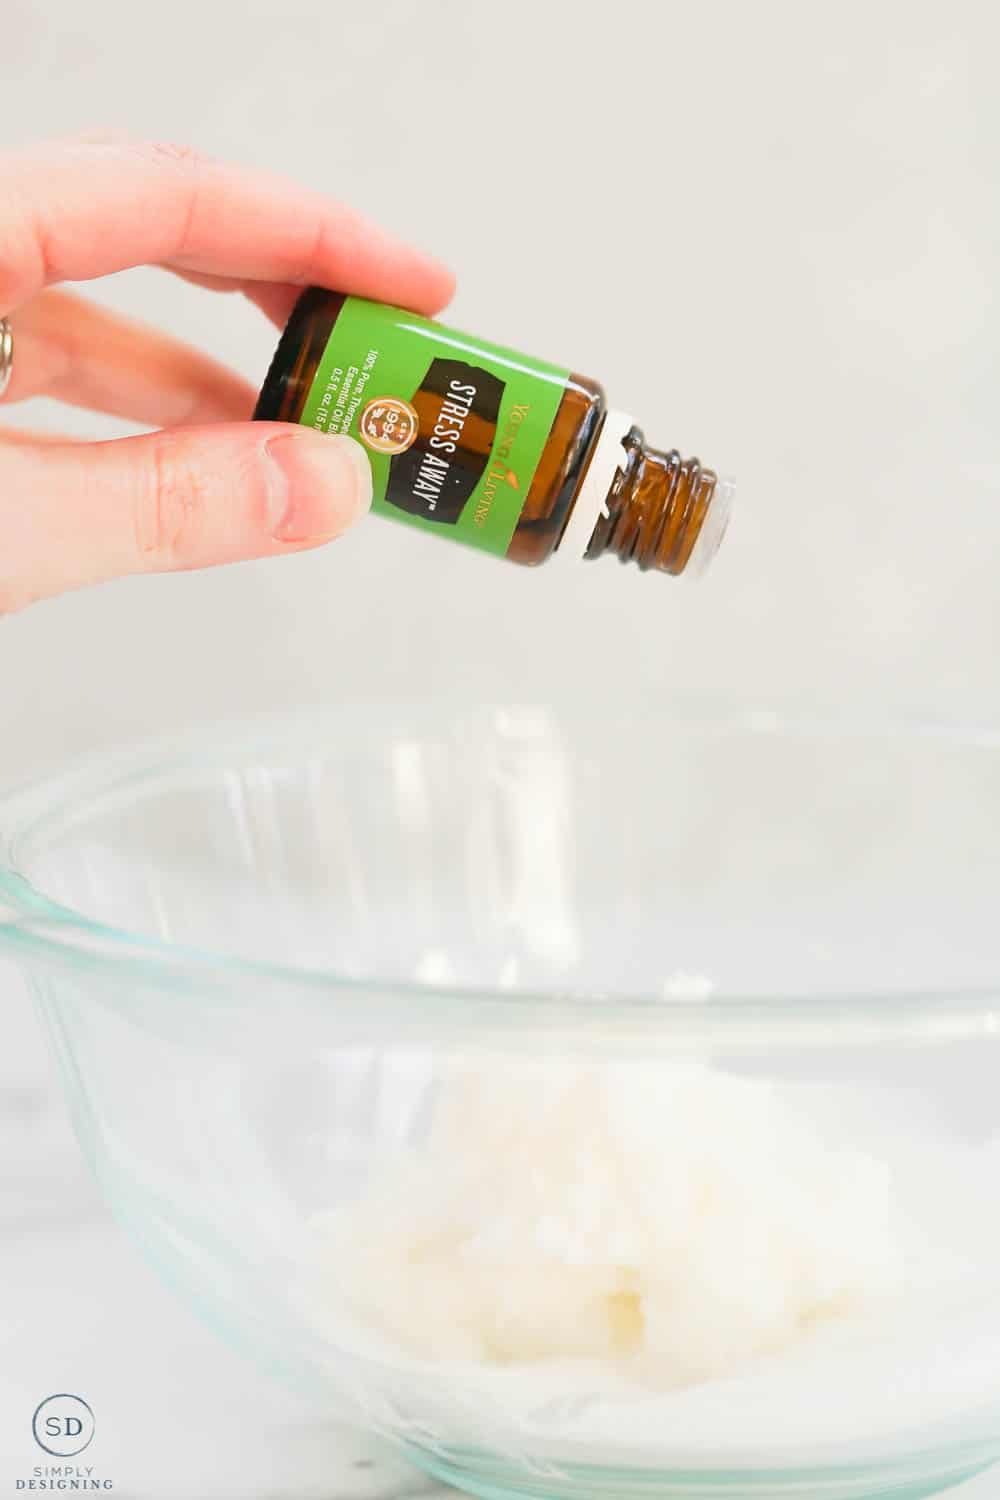 dropping stress away essential oil into glass bowl with sugar and coconut oil